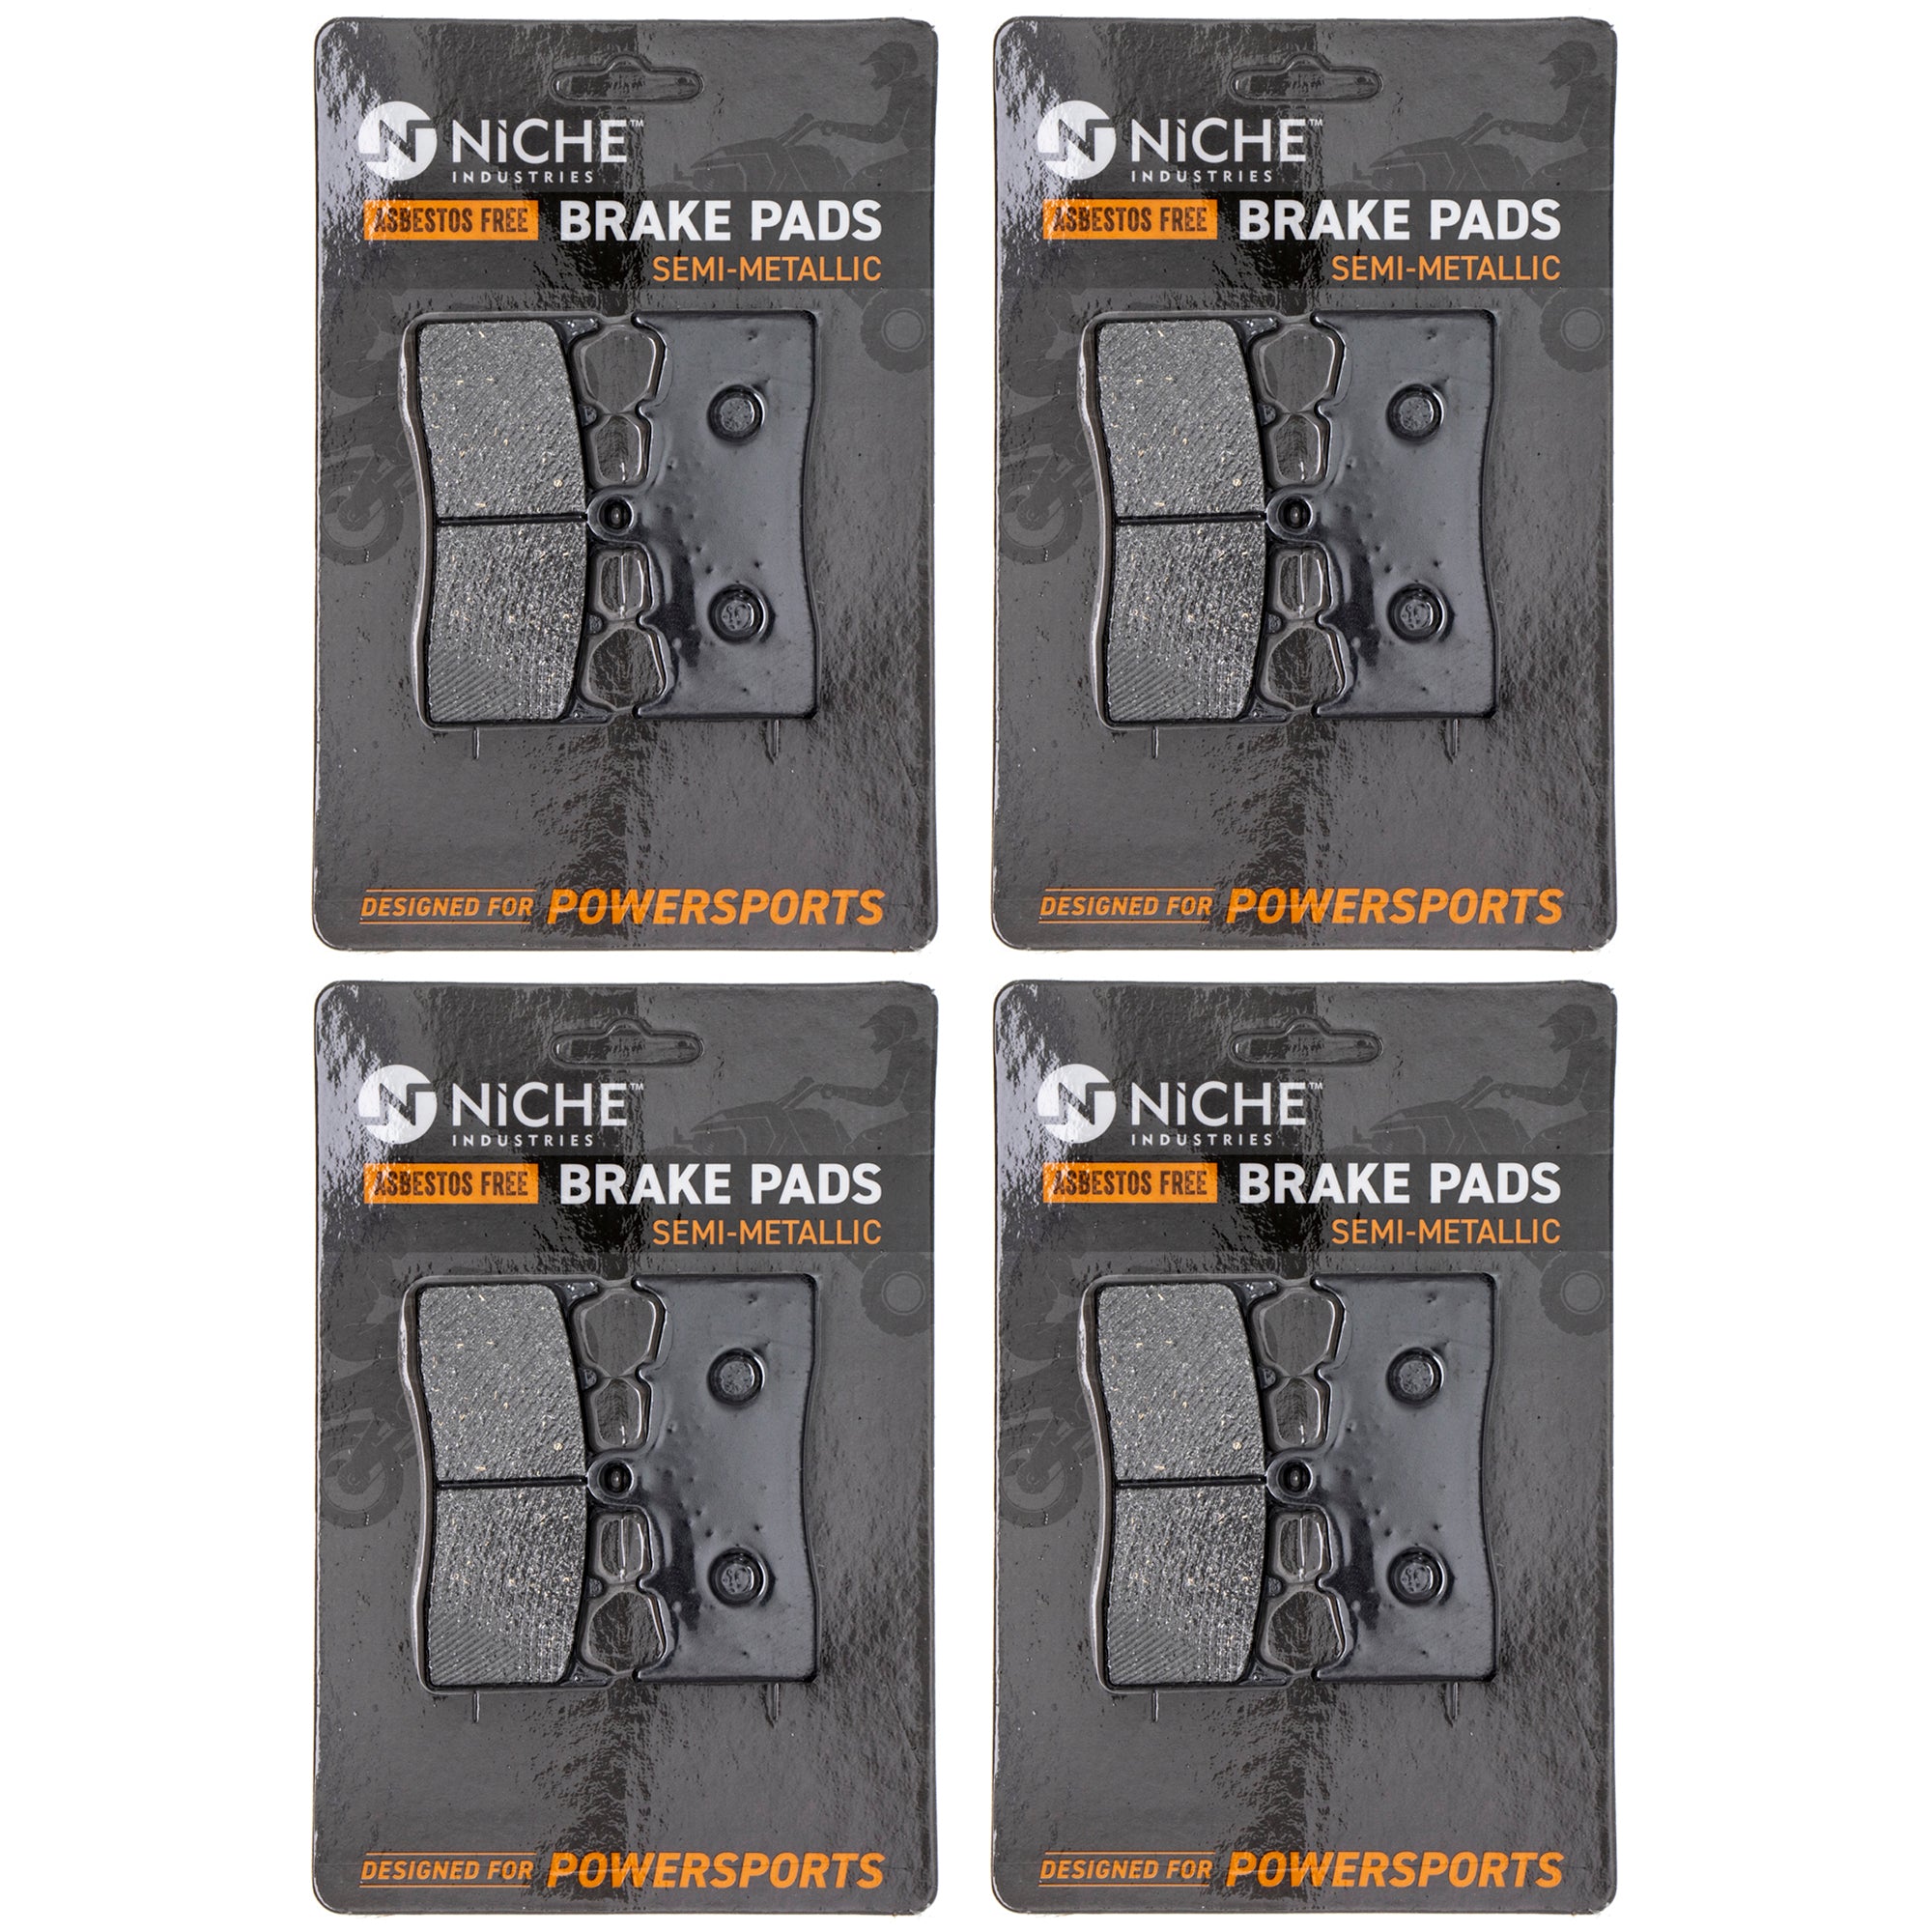 Front Semi-Metallic Brake Pad Set 4-Pack for zOTHER BMW R1200R R1200CL R1200C R1150RS NICHE 519-KPA2420D